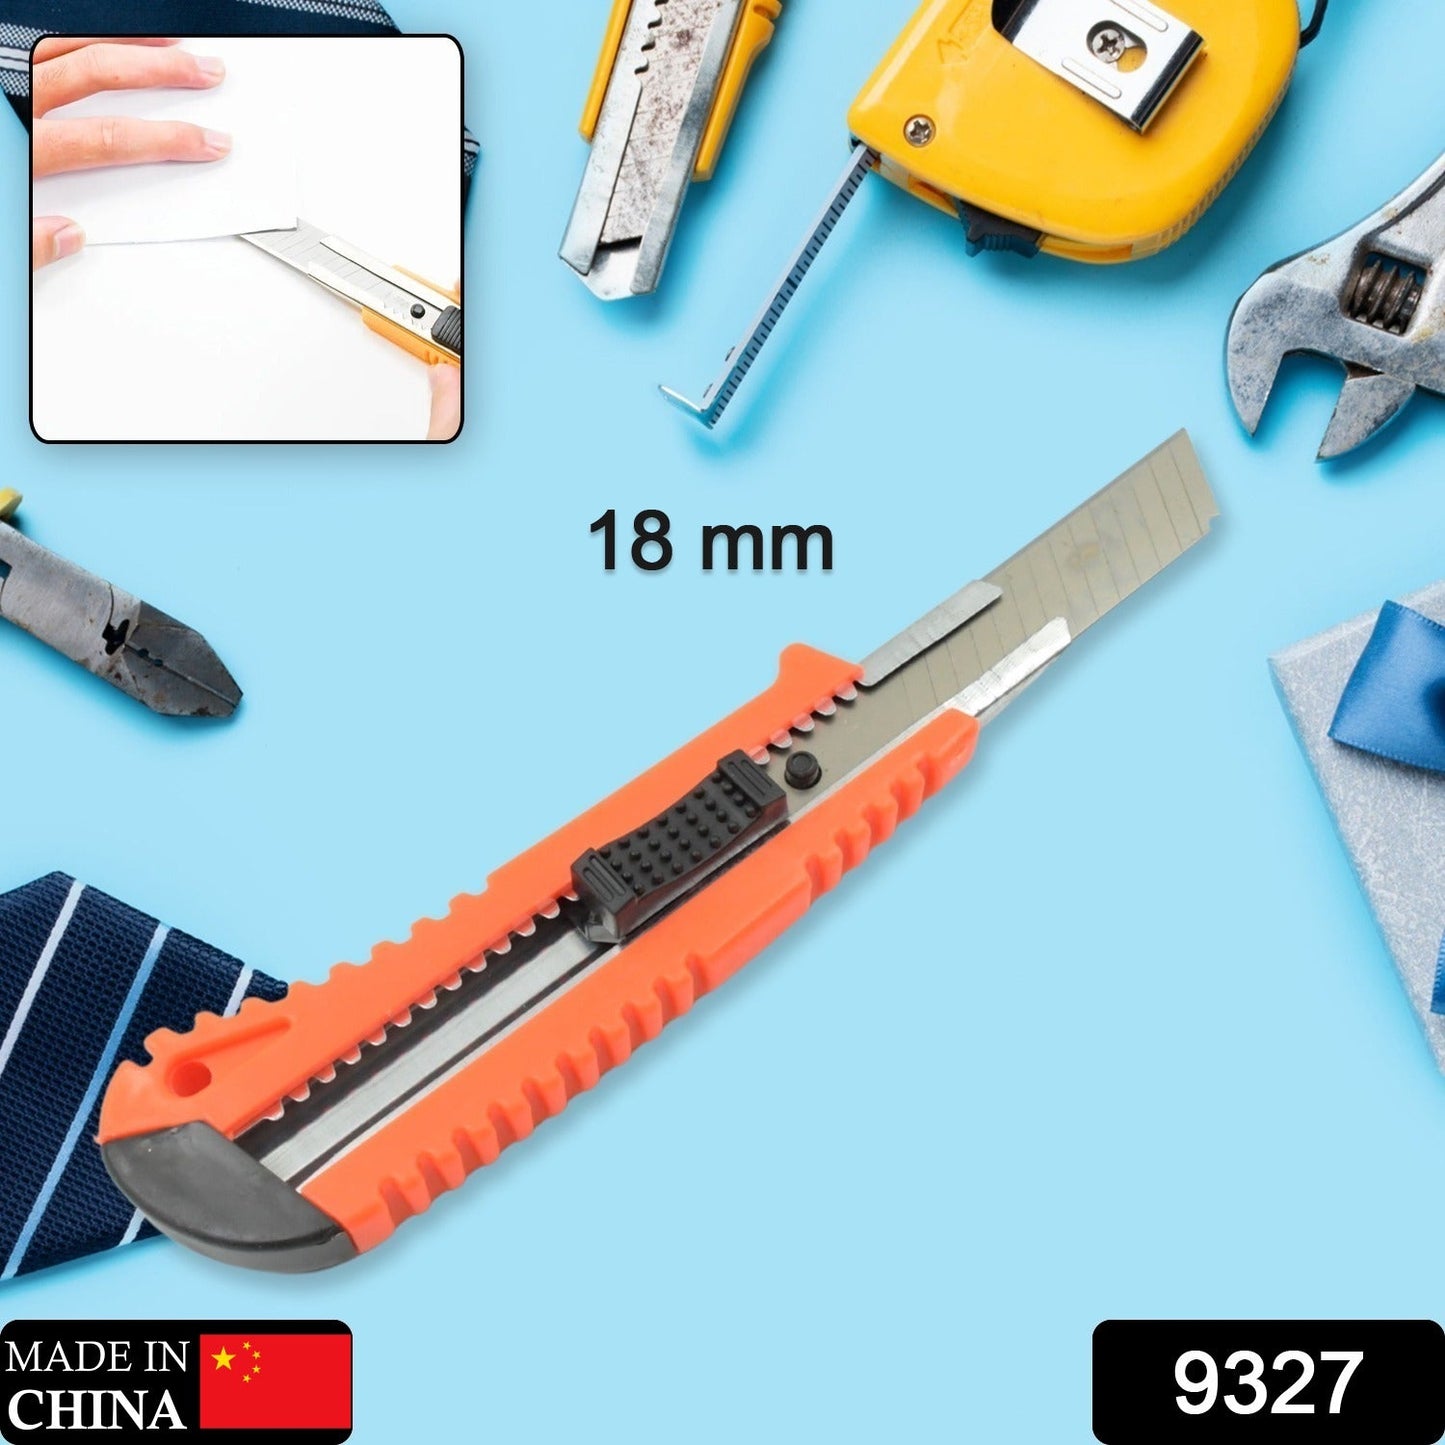 9327 Multi-Use Iron Cutter, Cutting Blade and Precision Knife Blade, Utility Knife - Heavy Duty Industrial Cutter Knife (18mm) - deal99.in